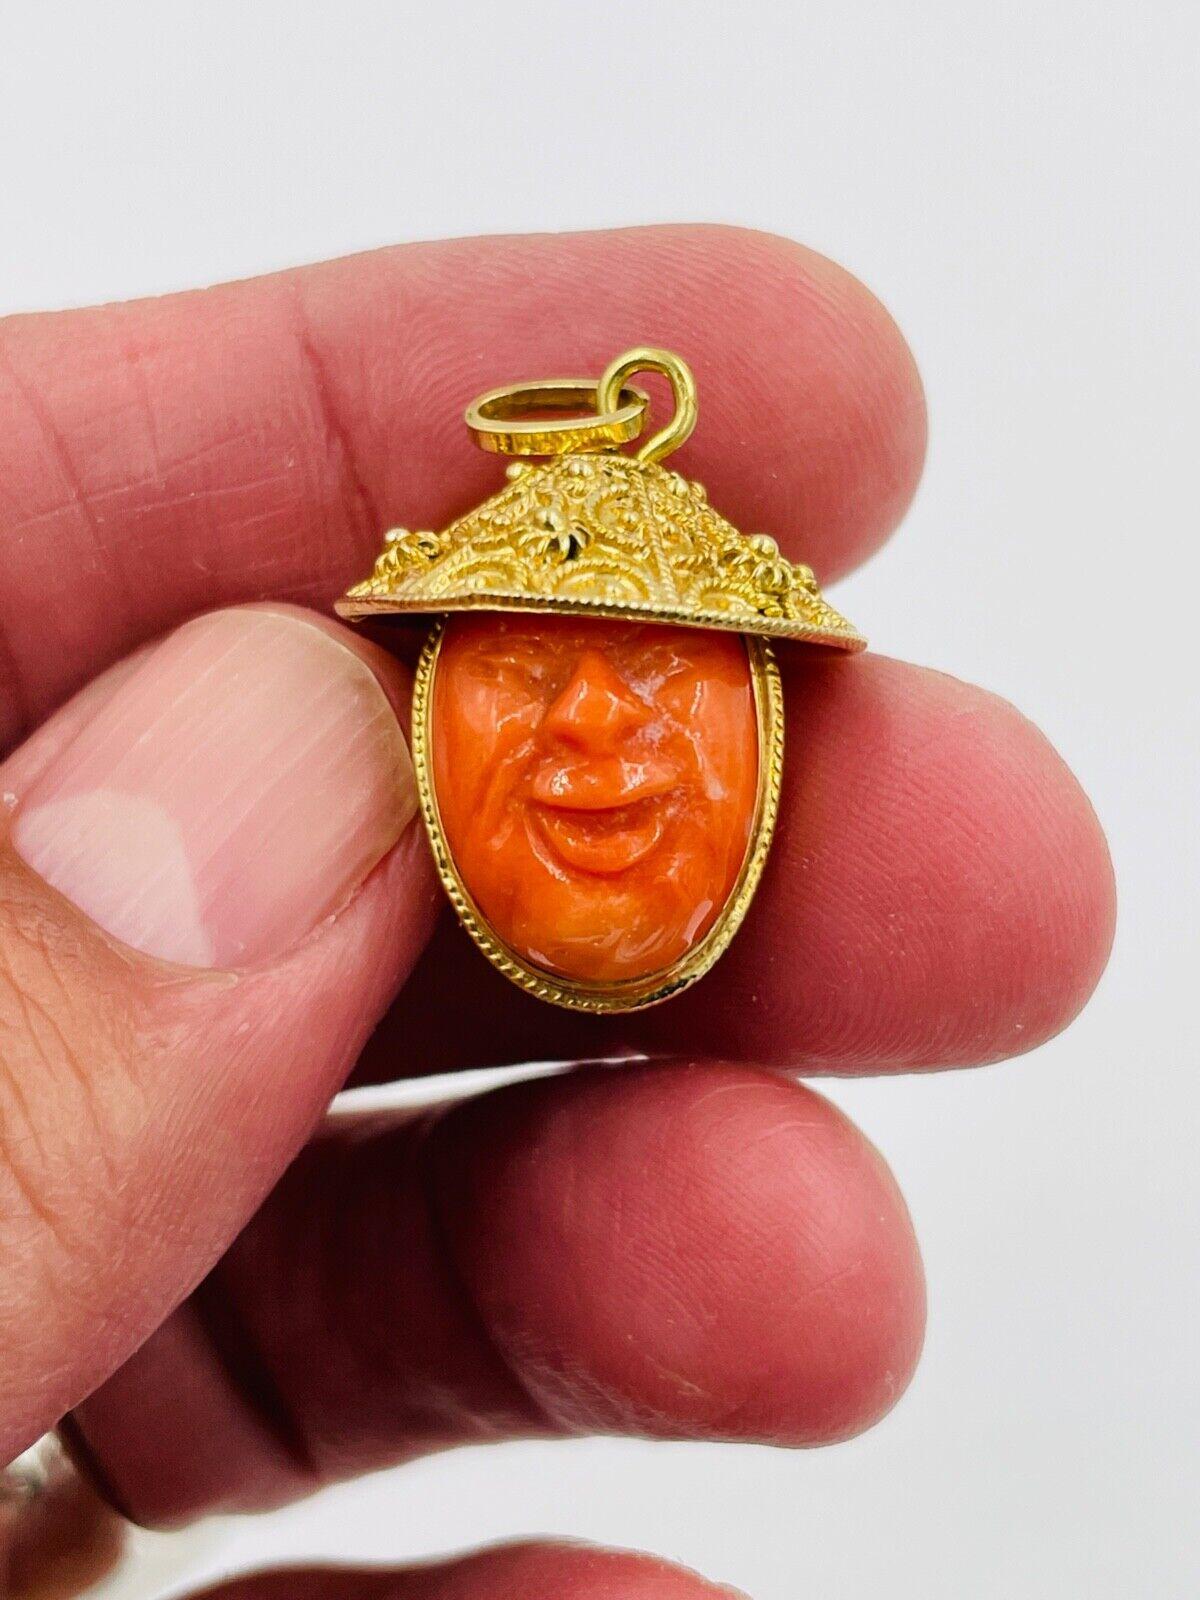 1950s Vintage two carved coral faces yellow gold charm pendant made in 18k yellow gold.  Very cute!

WEIGHT: 11 grams 

DIMENSIONS: 1-1/8” long X 3/4” wide

CONDITION:  high magnification photographs show considerable design details, and the item is